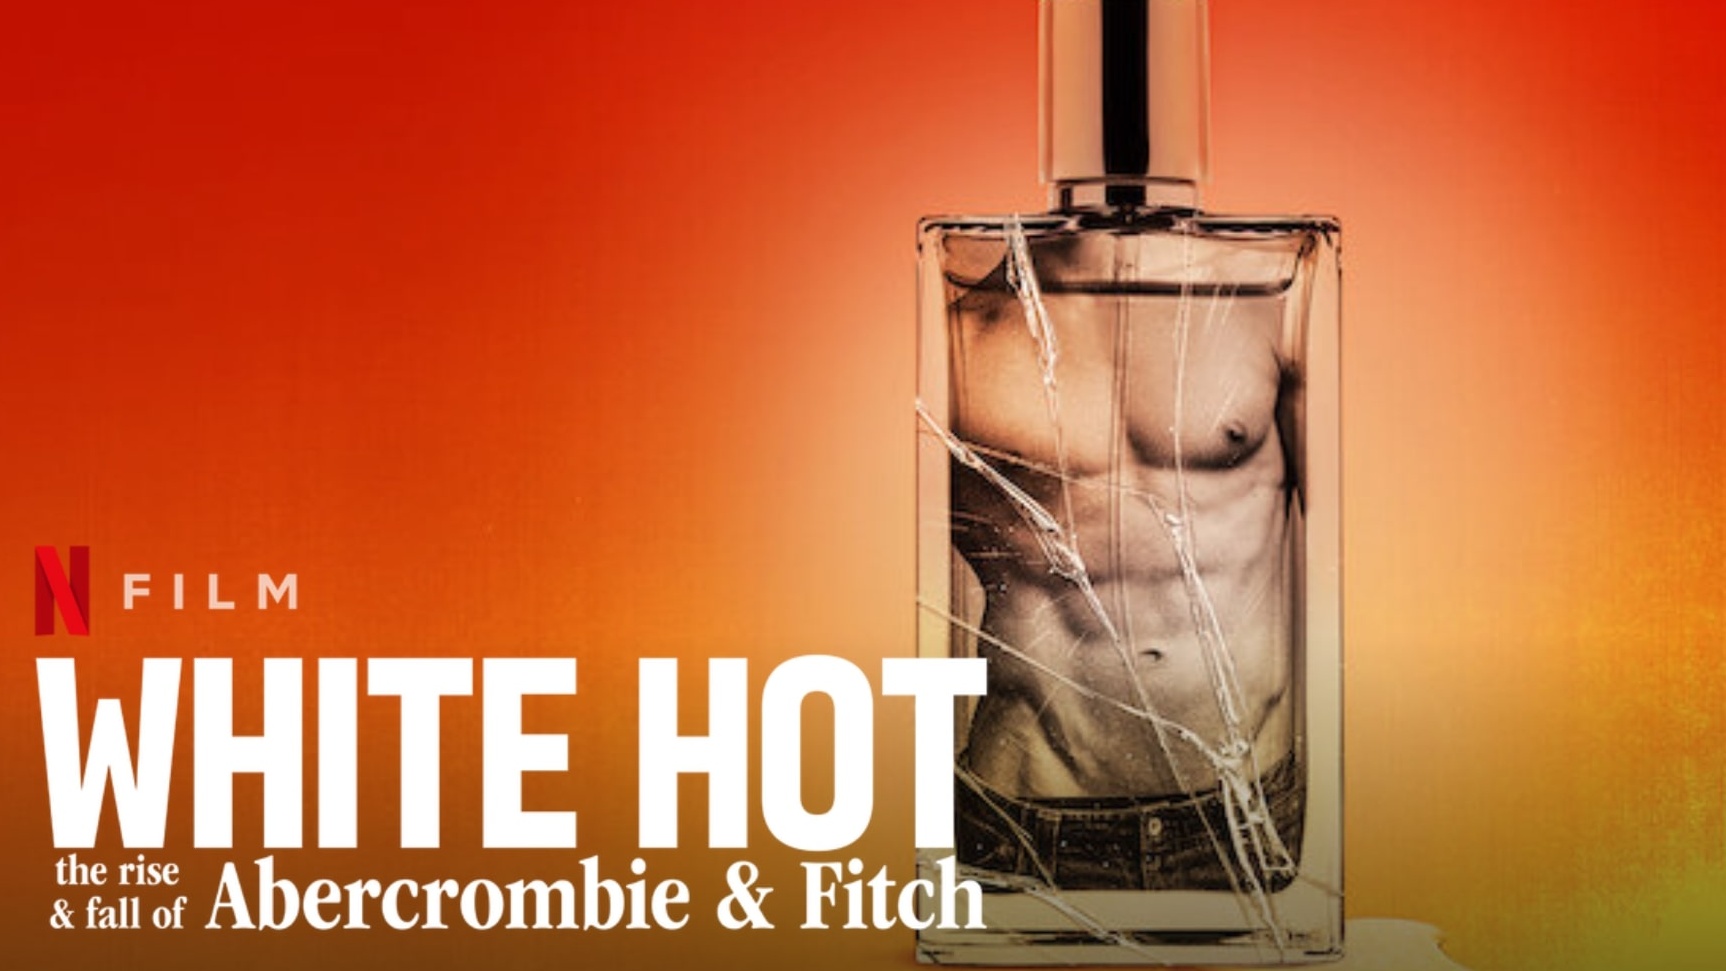 Coming soon is a Netflix movie about Abercrombie and Fitch